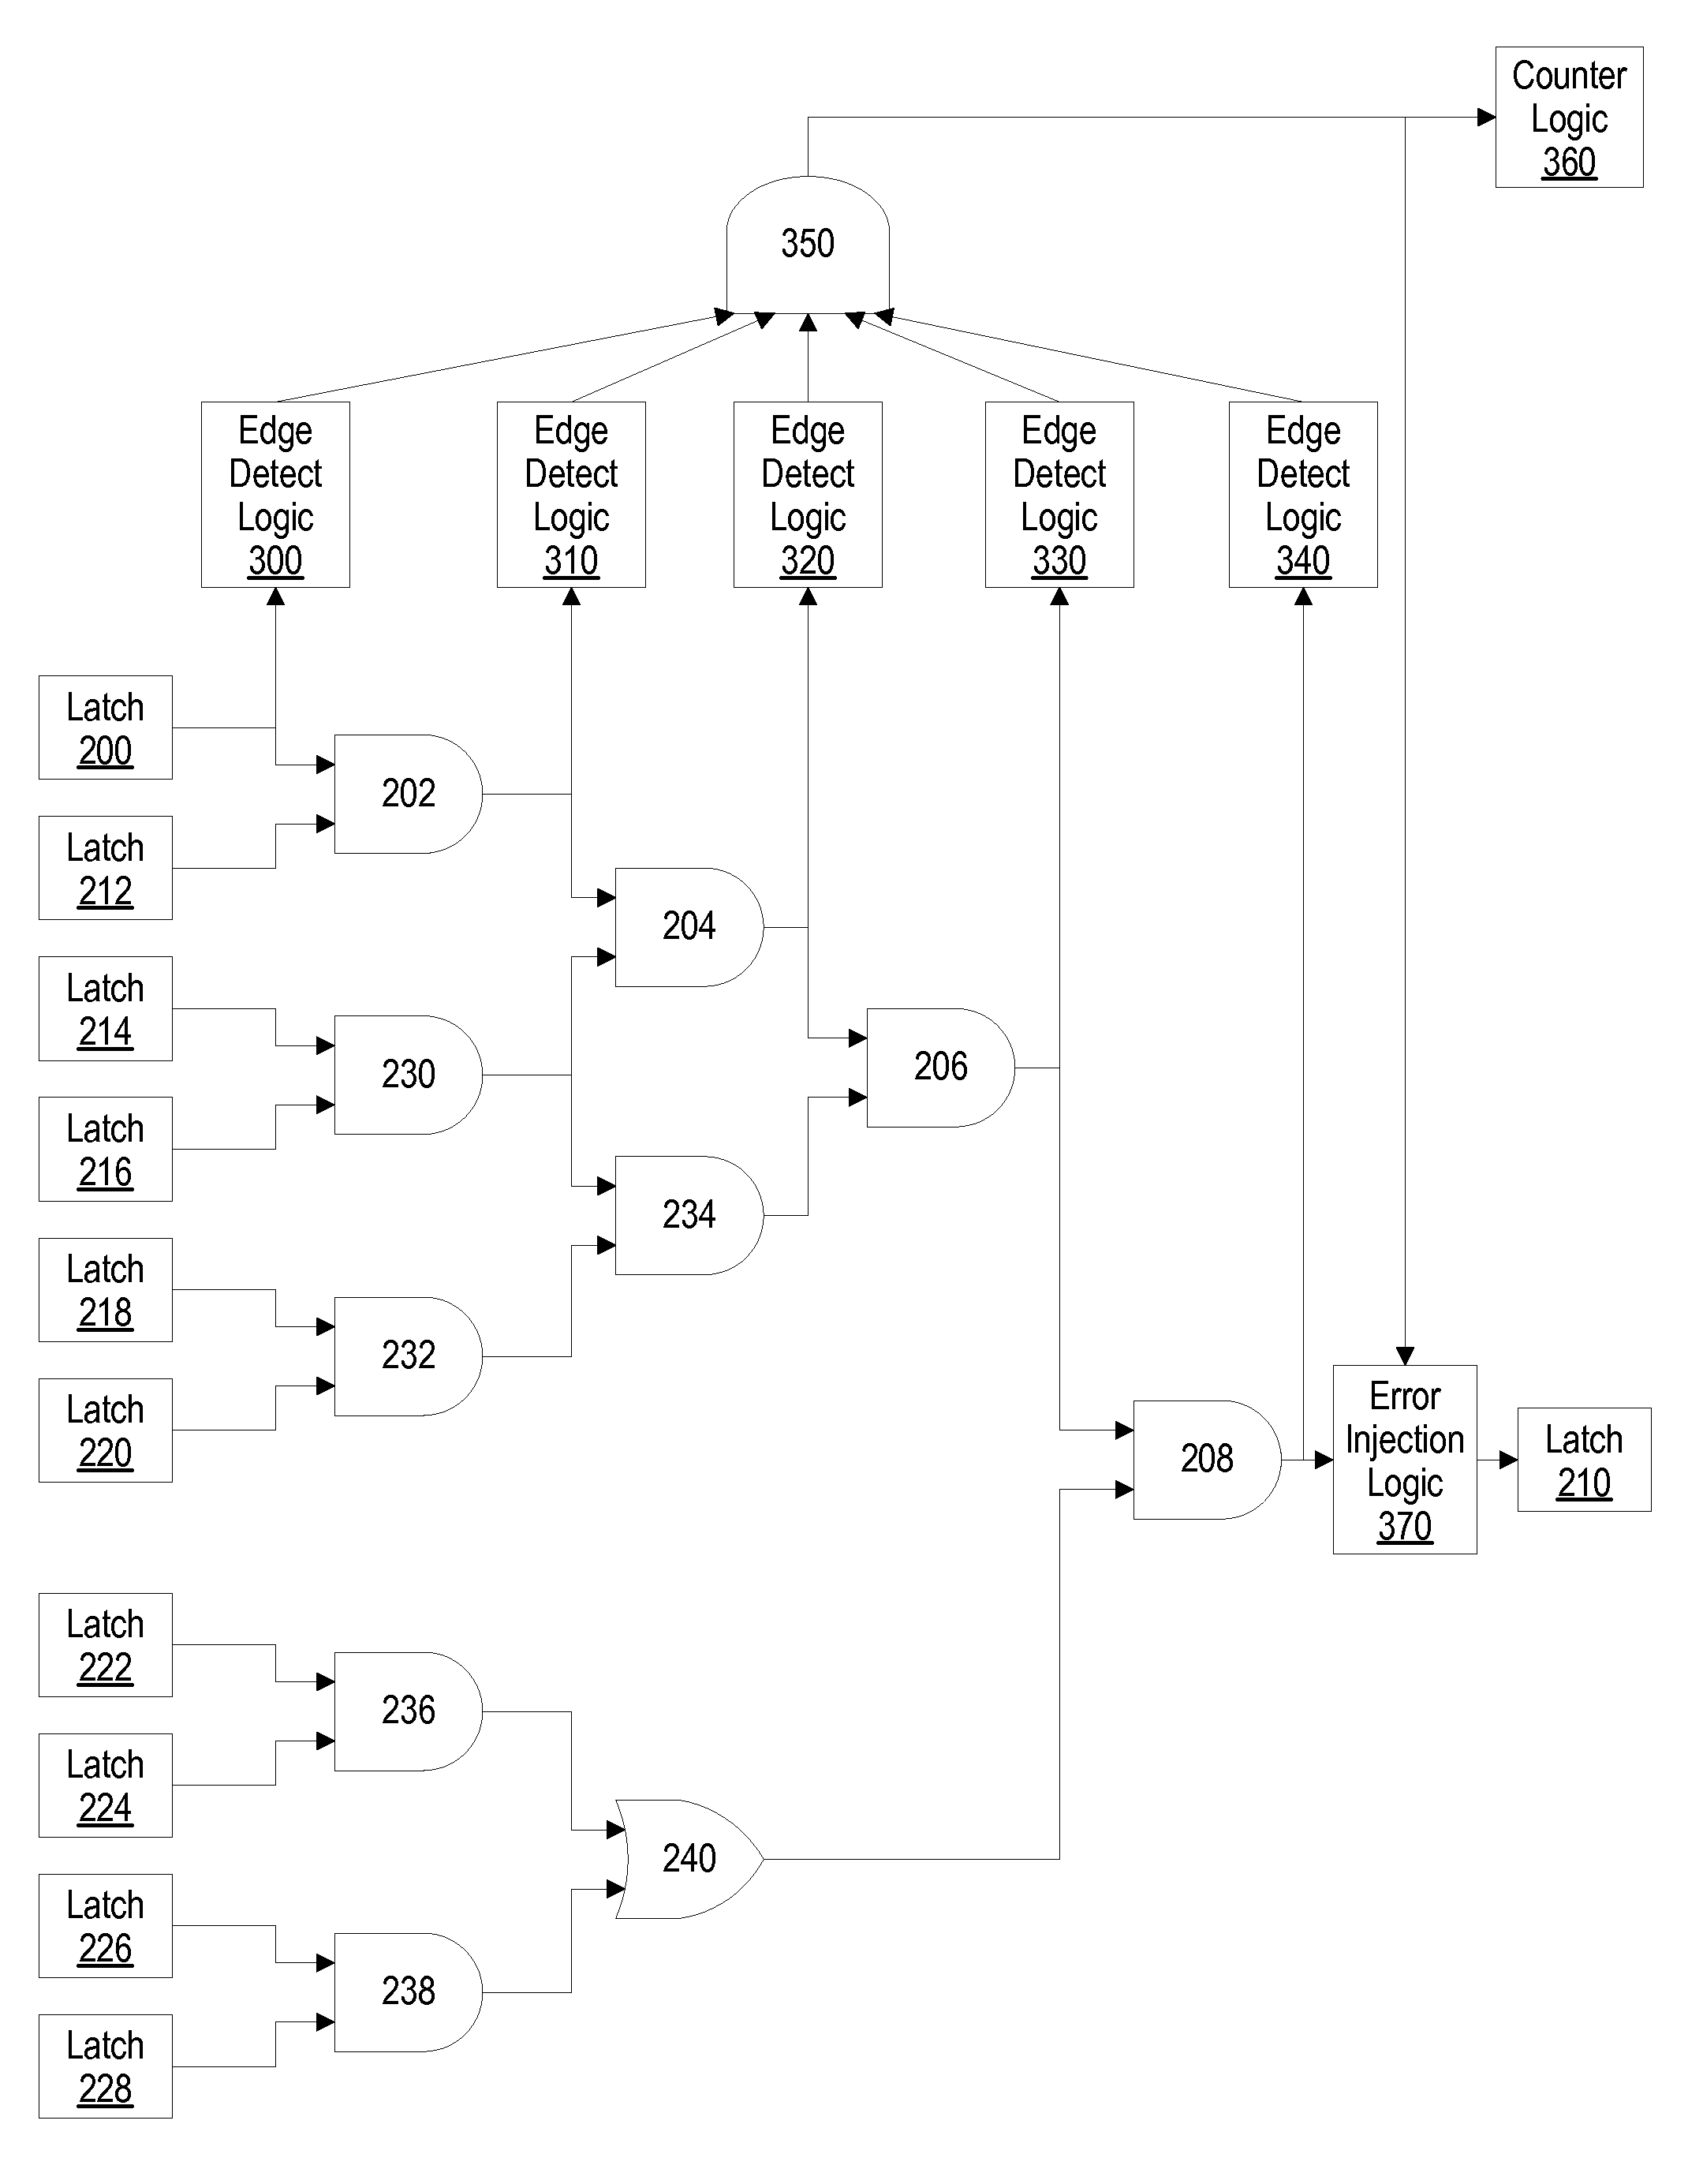 System and Method of Automating the Addition of RTL Based Critical Timing Path Counters to Verify Critical Path Coverage of Post-Silicon Software Validation Tools